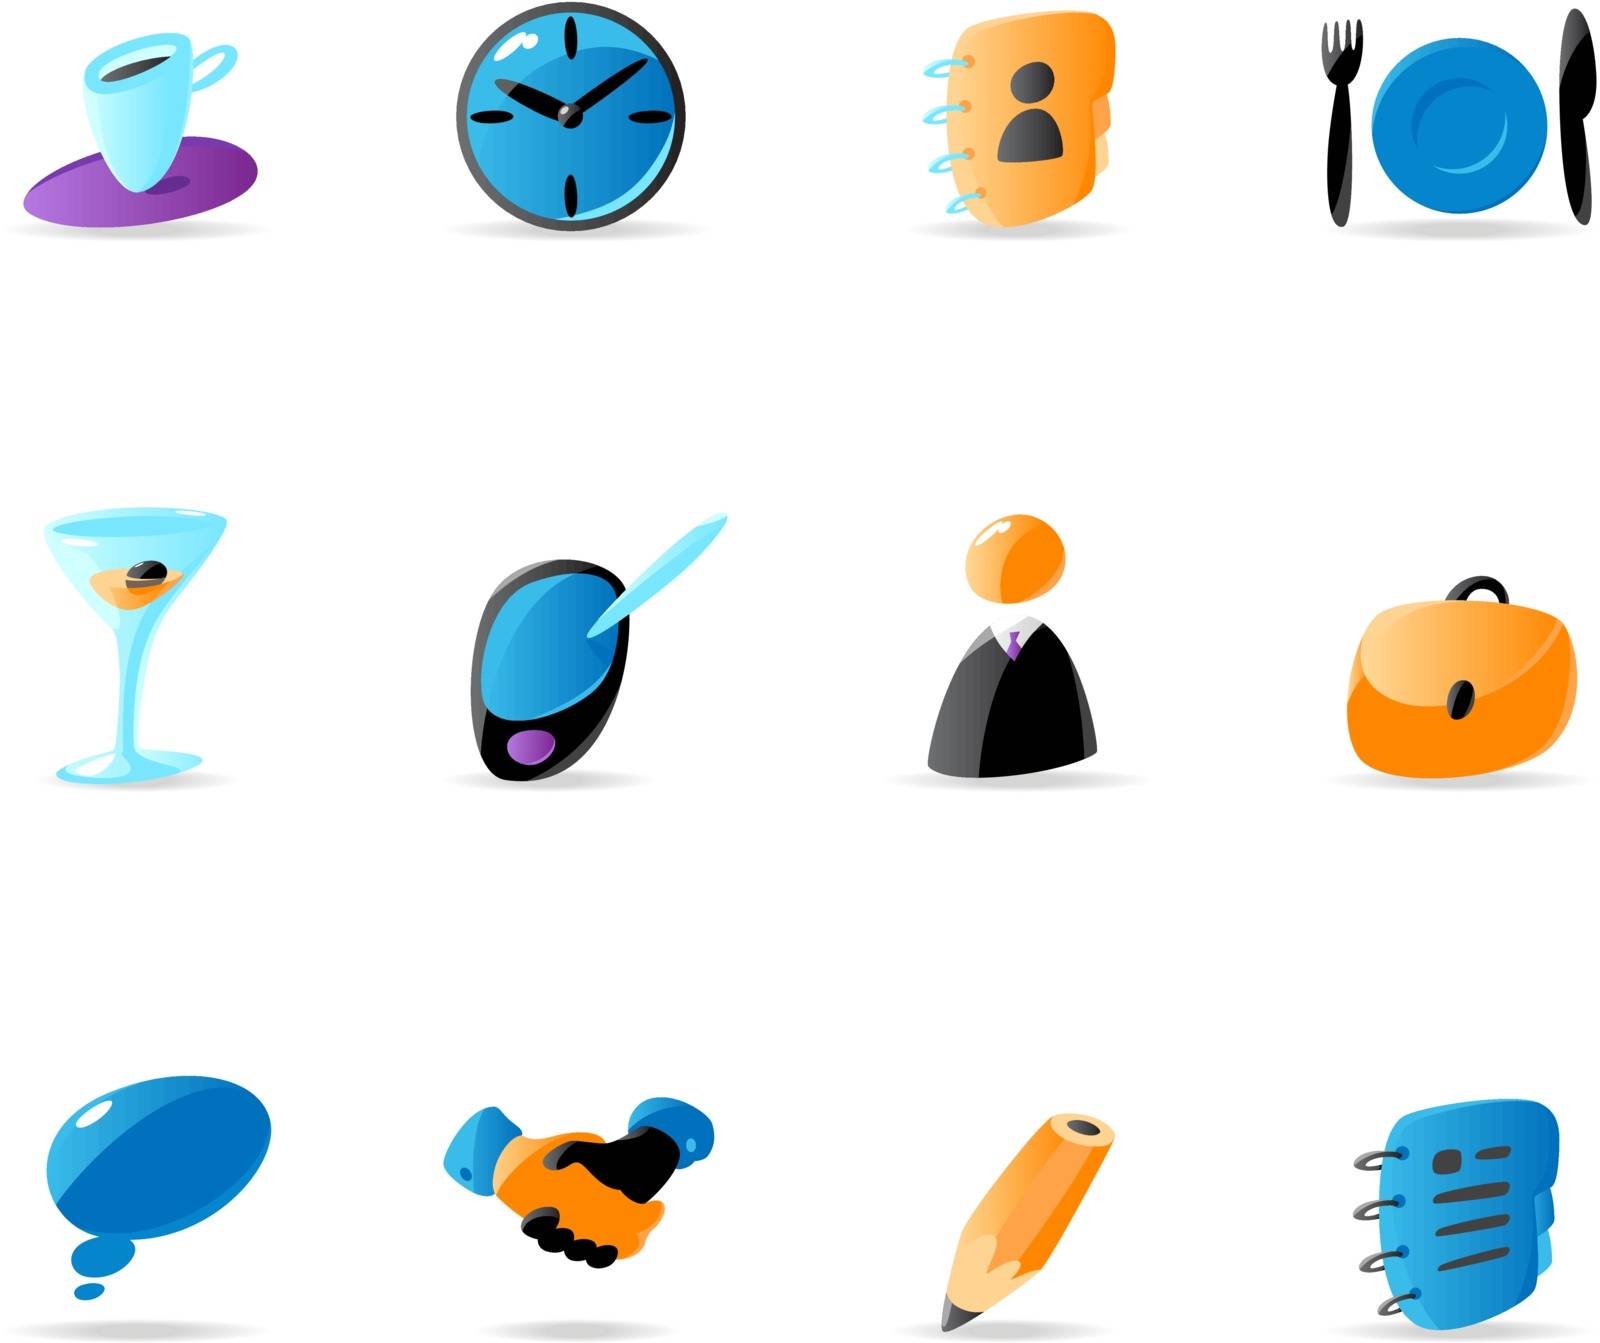 Bright business contacts and meeting icons. Vector illustration